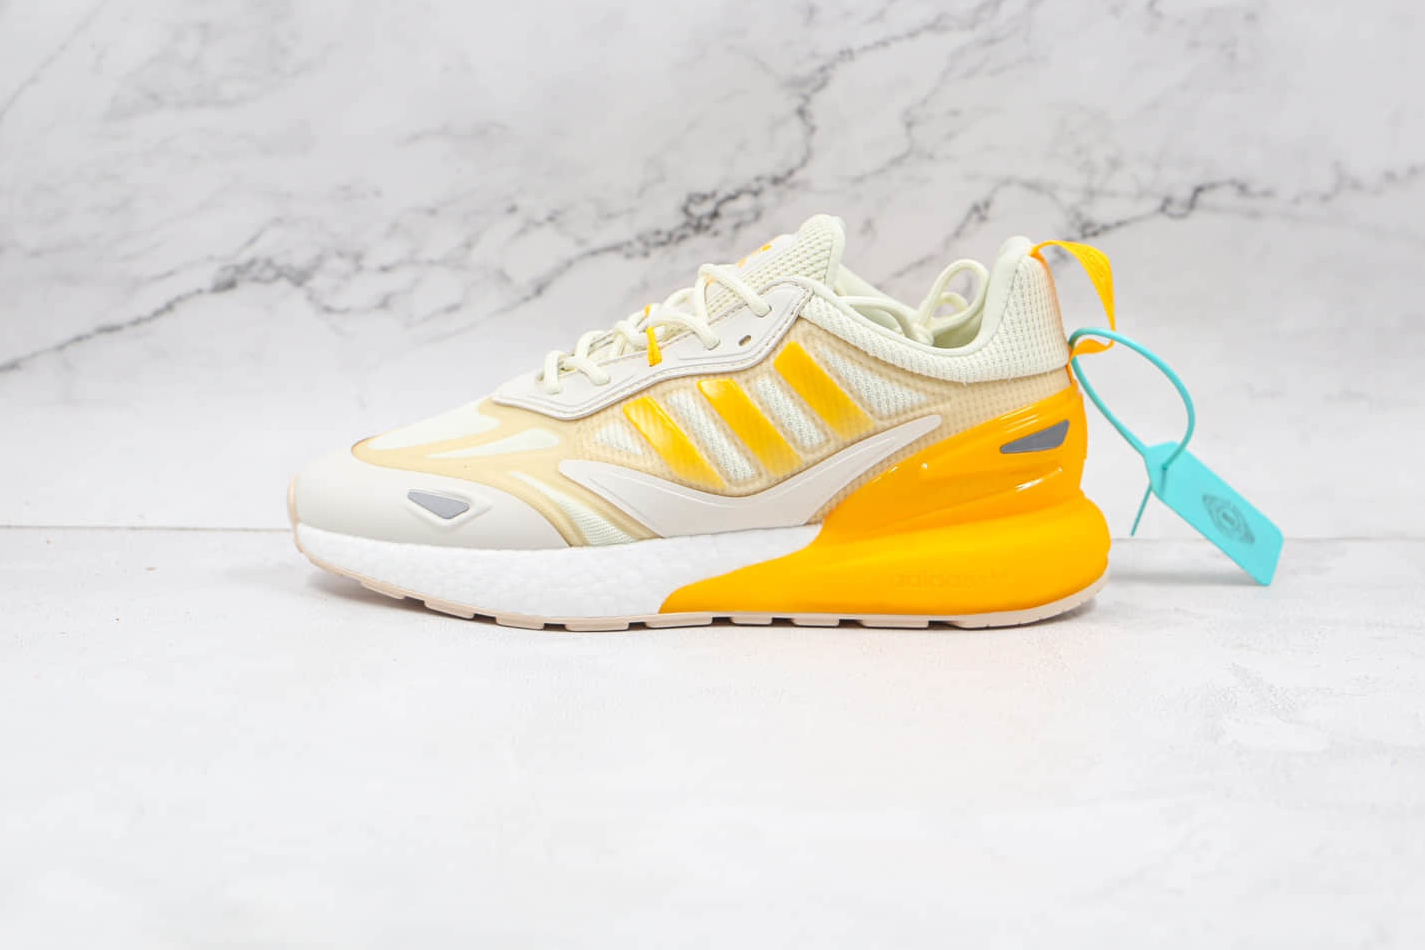 Adidas Originals ZX 2K Boost 2.0 'Wonder White Orange Tint' GZ7823 - Innovative Style and Comfort for Sneaker Enthusiasts